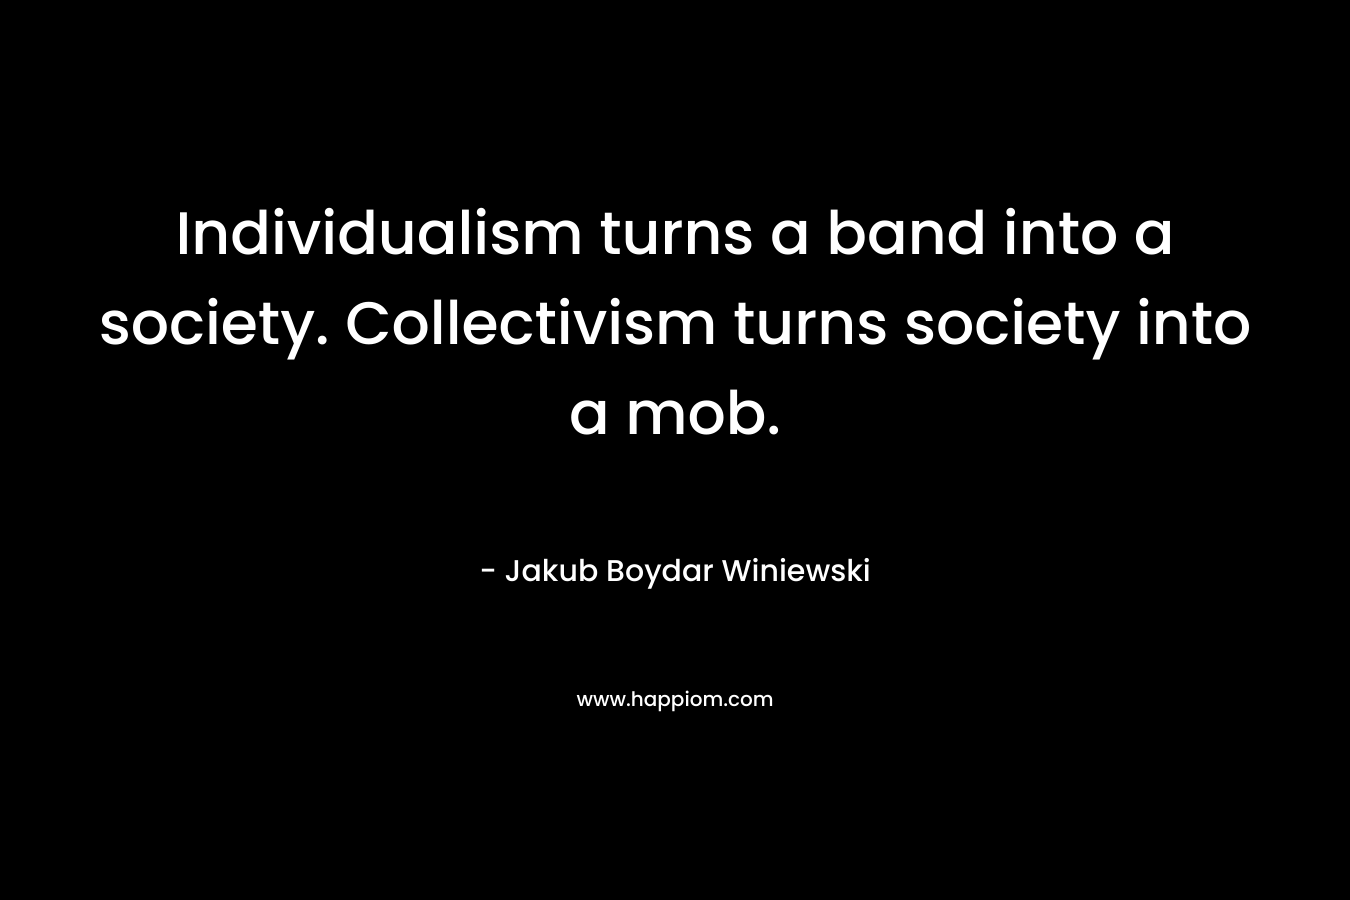 Individualism turns a band into a society. Collectivism turns society into a mob. – Jakub Boydar Winiewski